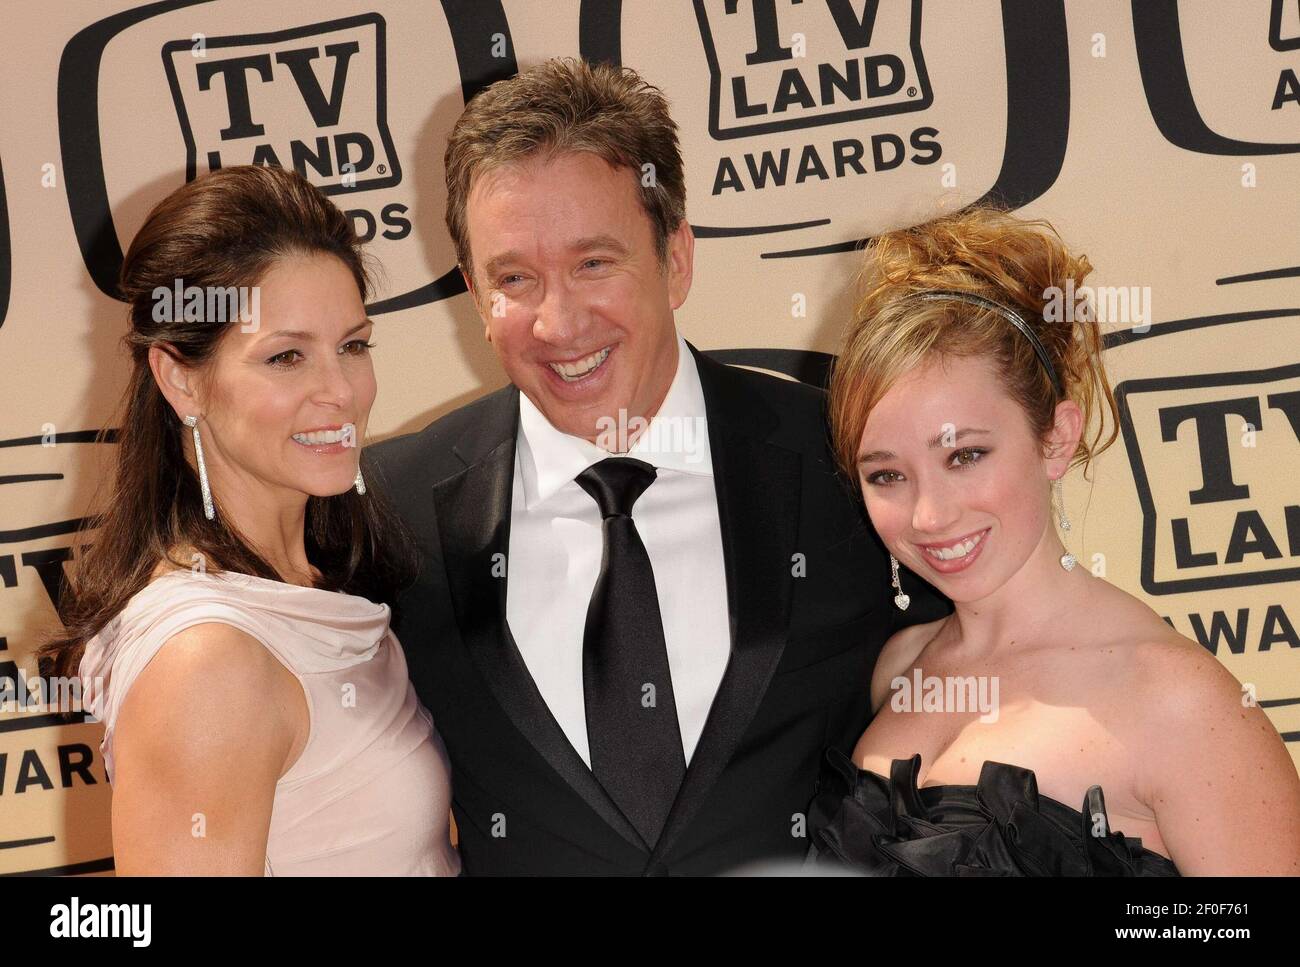 Jane Hajduk, Tim Allen and daughter Katherine Allen. 17 April 2010, Culver  City, CA. The 8th Annual TV Land Awards held at Sony Pictures Studios.  Photo Credit: Giulio Marcocchi/Sipa Press./TvLand gm.043/1004190955 Stock